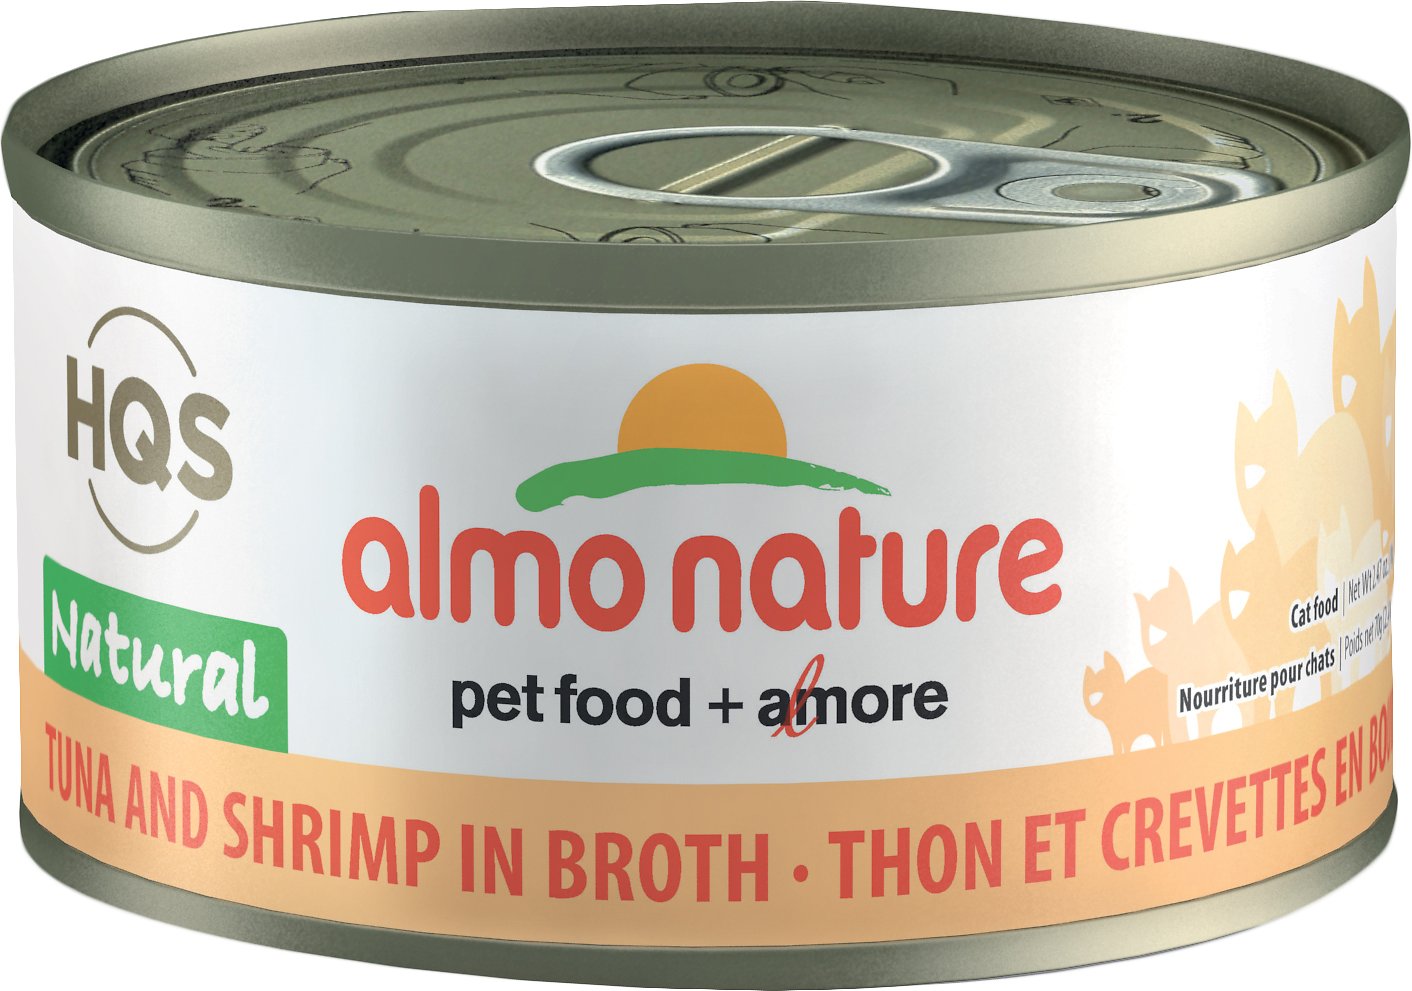 Almo Nature | Pet Food Stores Near Me Toronto | HQS Natural Tuna and Shrimps in Broth | ARMOR THE POOCH